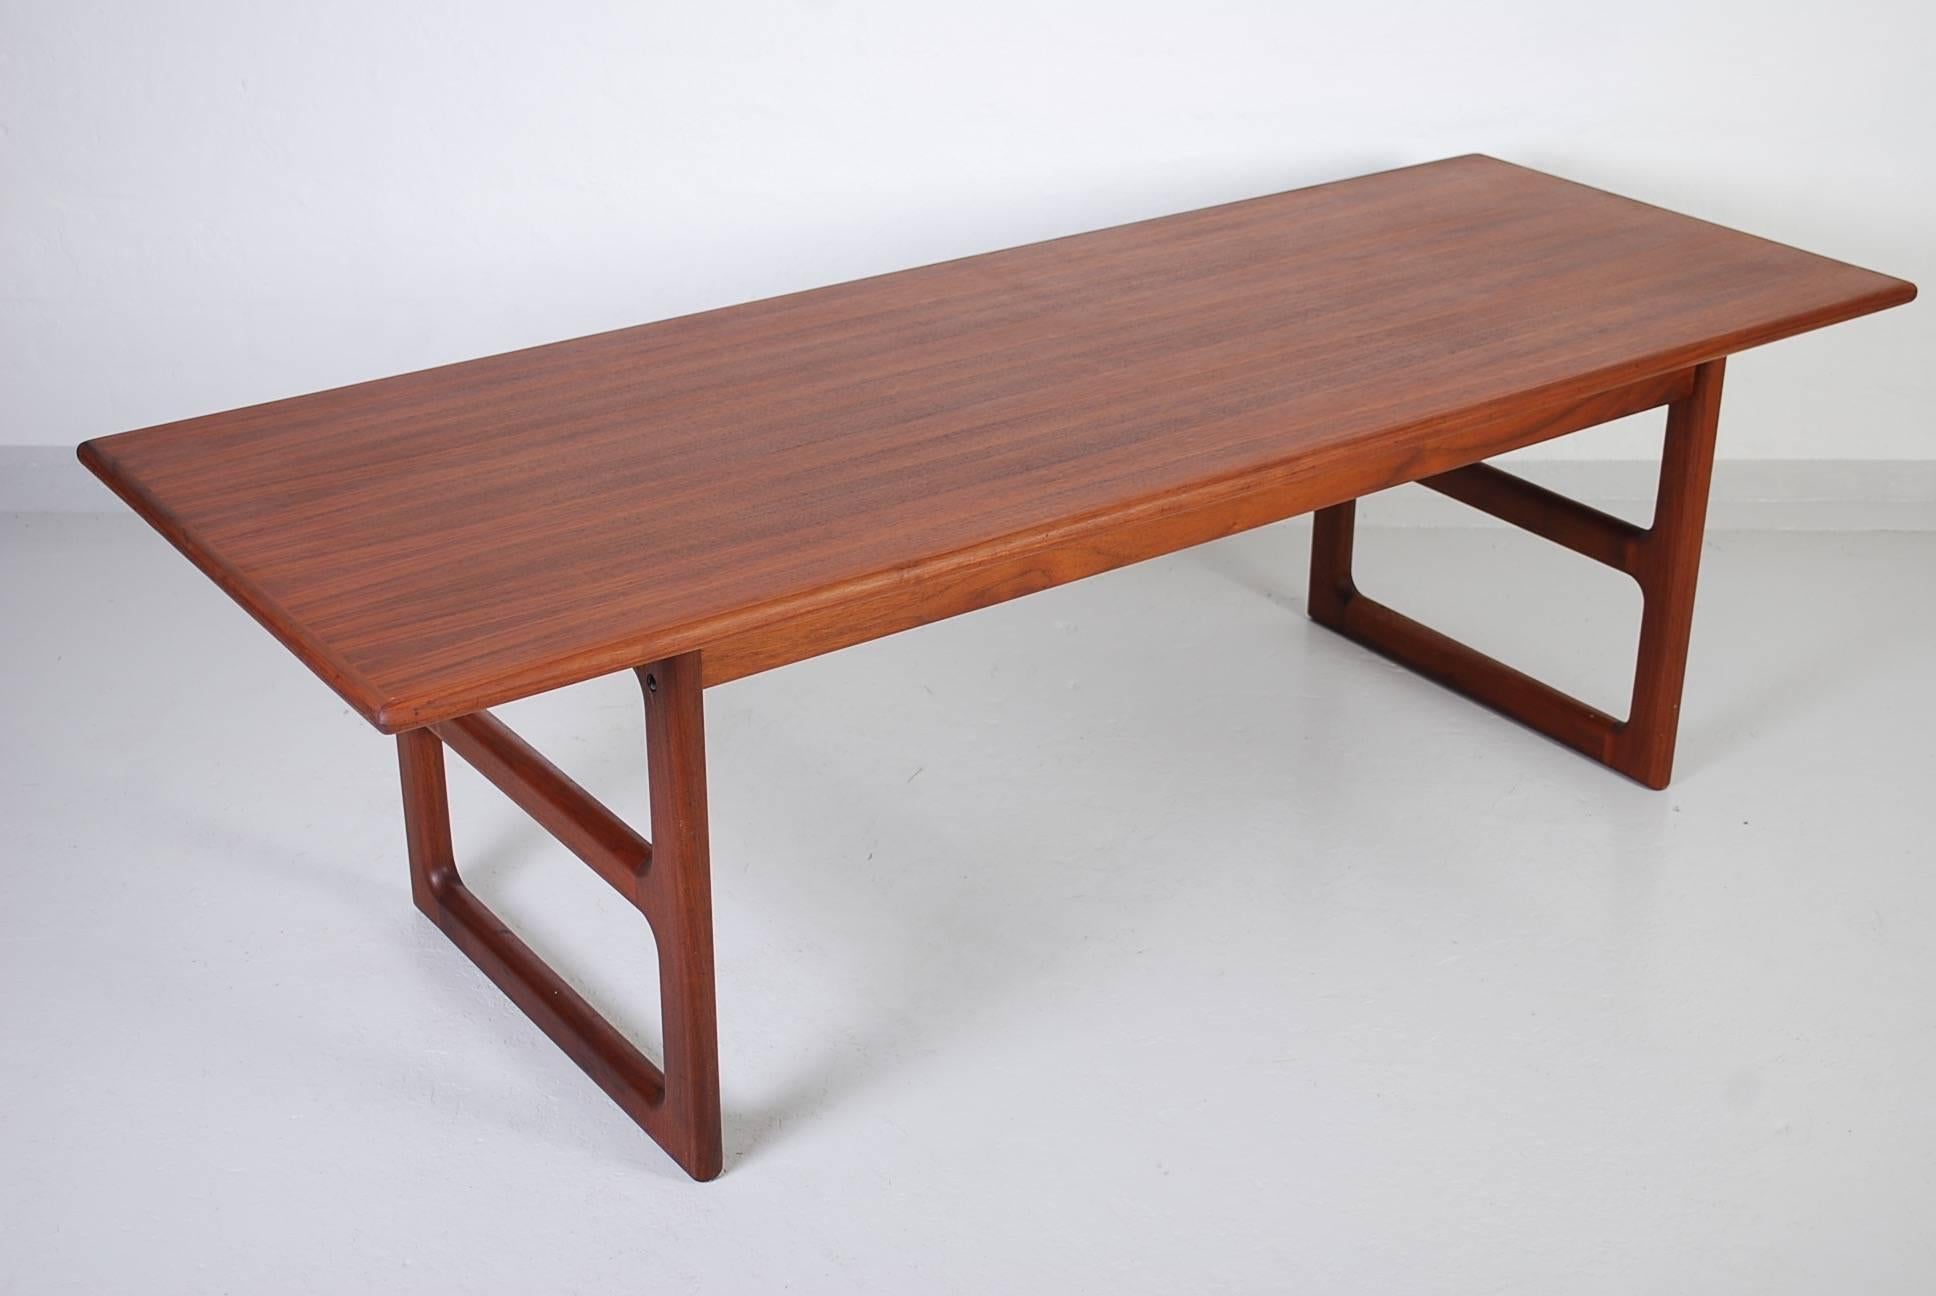 Midcentury Danish Teak Coffee Table with Sculptured Legs In Good Condition For Sale In Malmo, SE